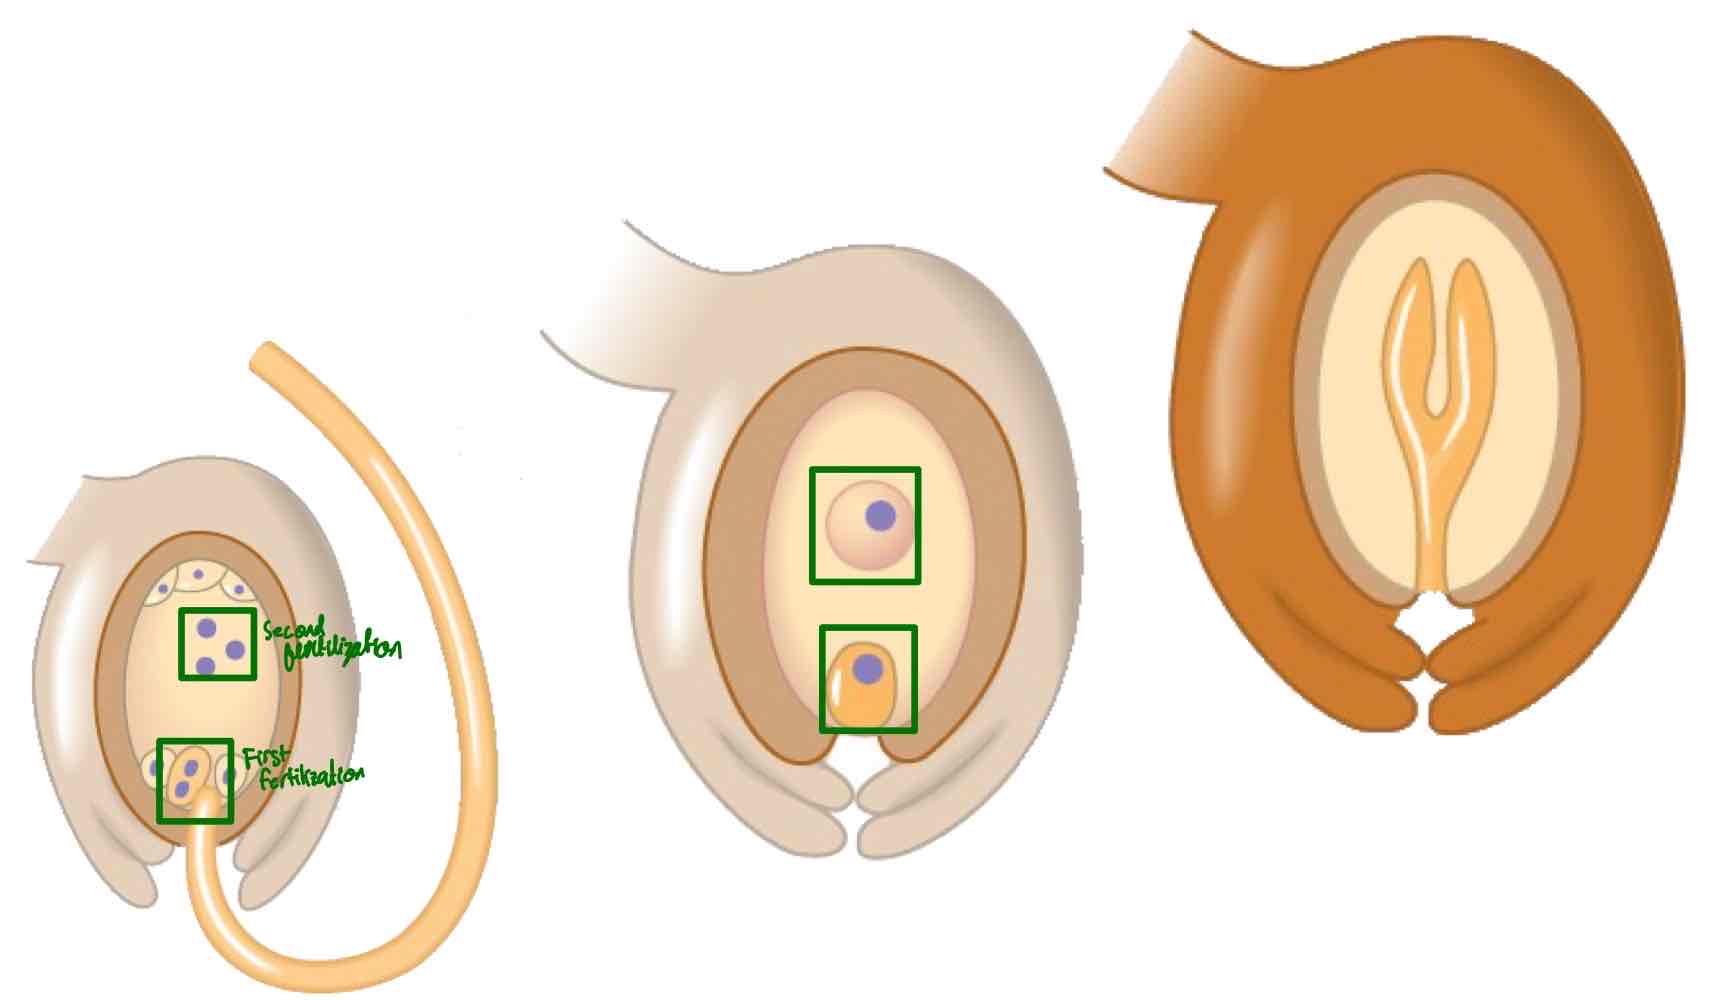 <p>Union in flowering plants, wherein one sperm fertilizes the egg to form the embryo, while one other sperm combines with two polar nuclei to form endosperm.</p>